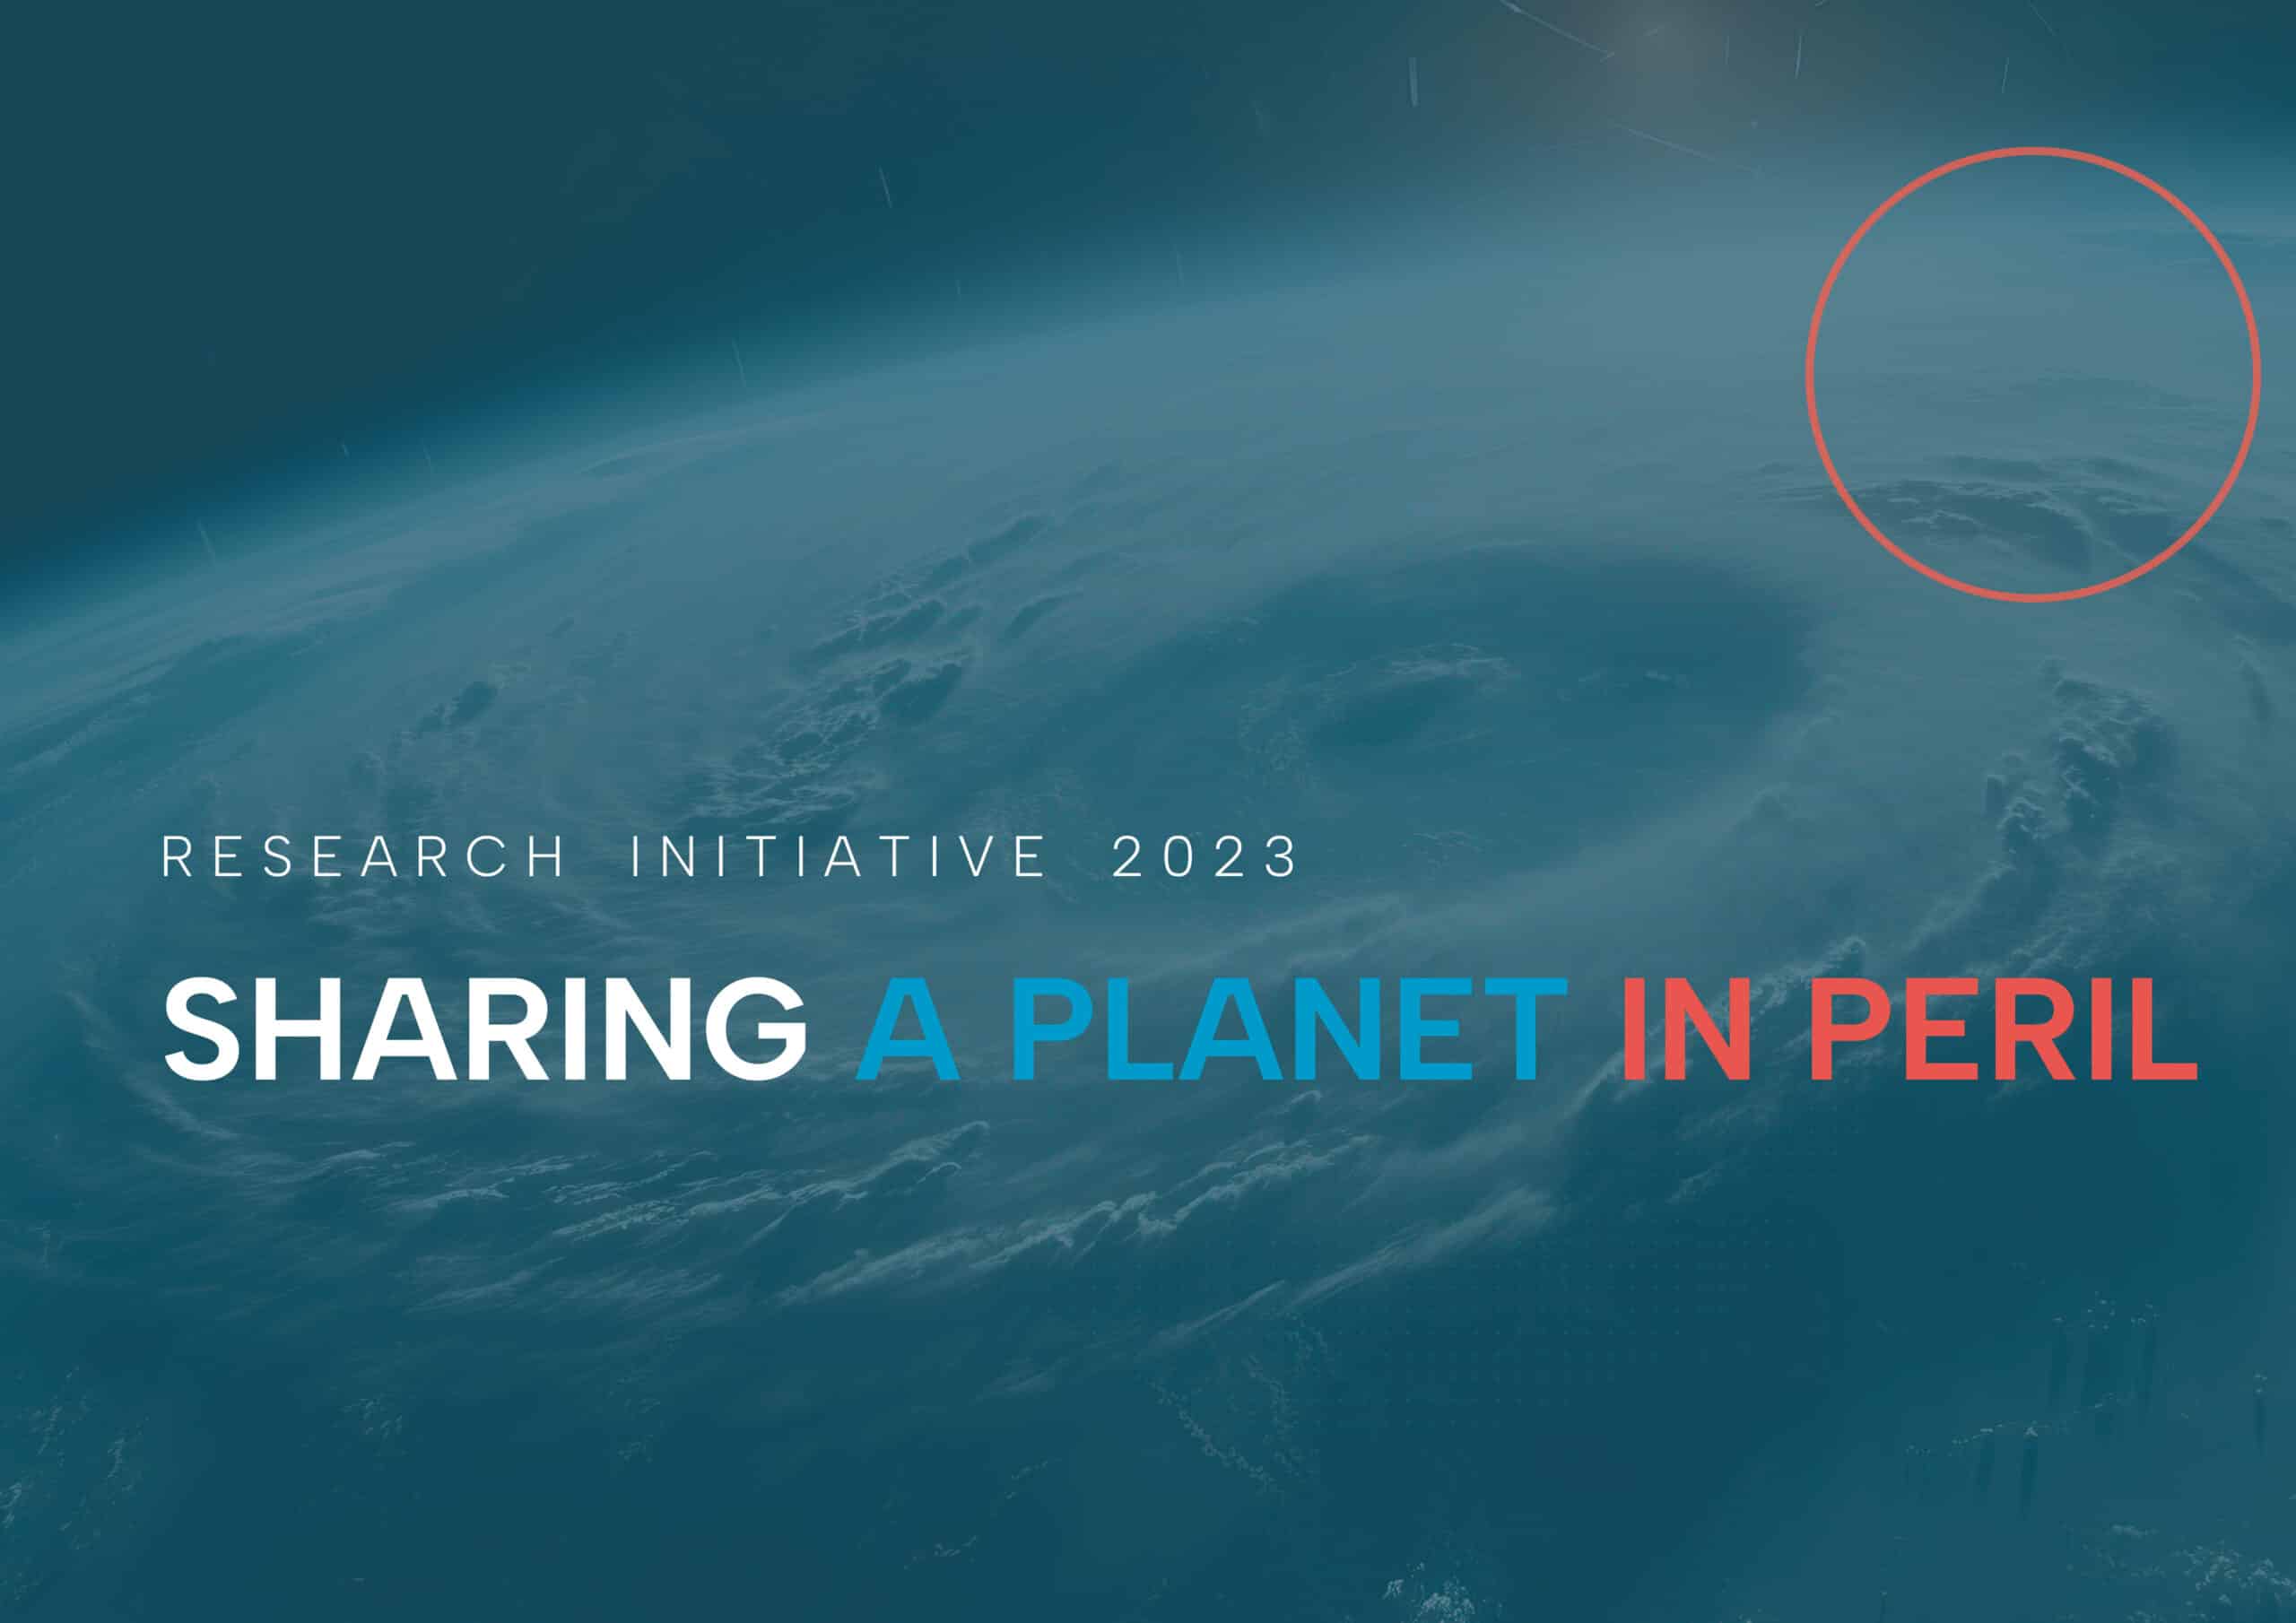 A cover image for the research initiative "sharing a planet in peril"